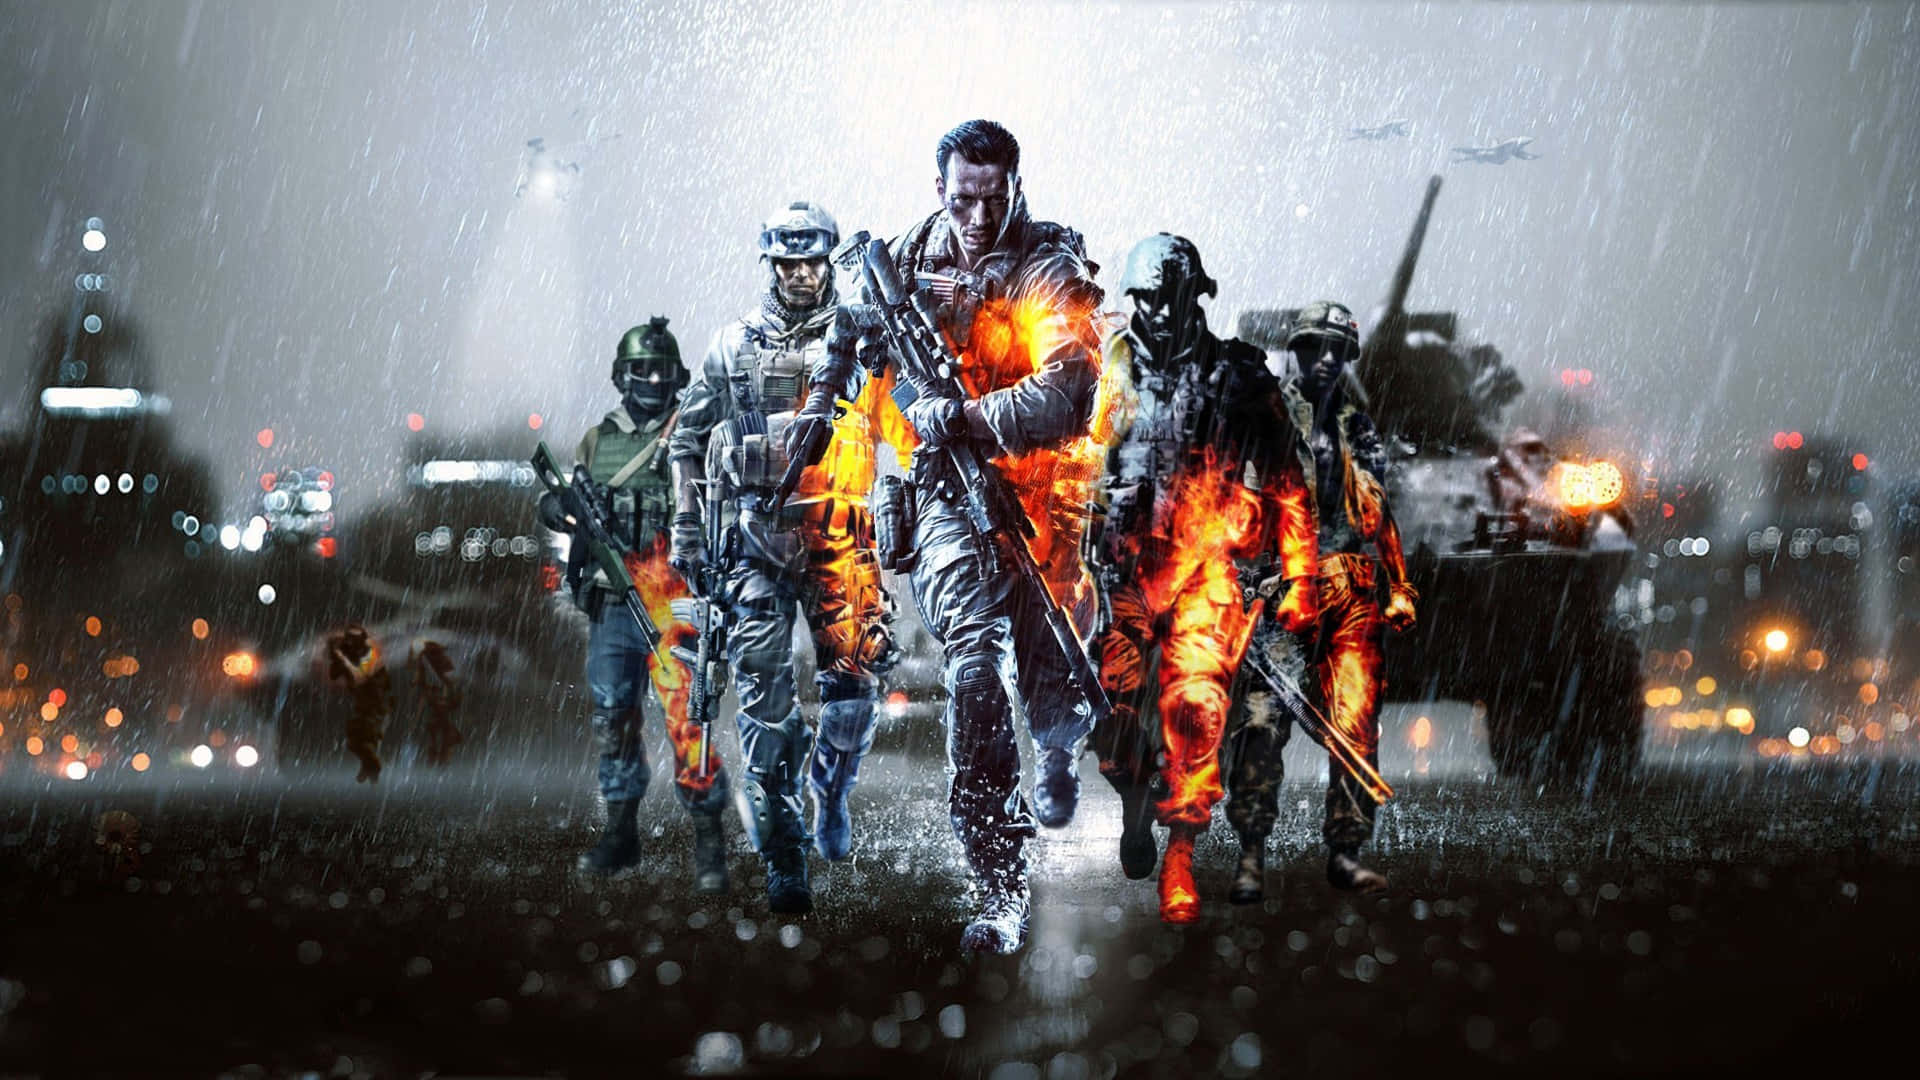 1080x1920 Battlefield 3 Wallpapers for IPhone 6S /7 /8 [Retina HD]